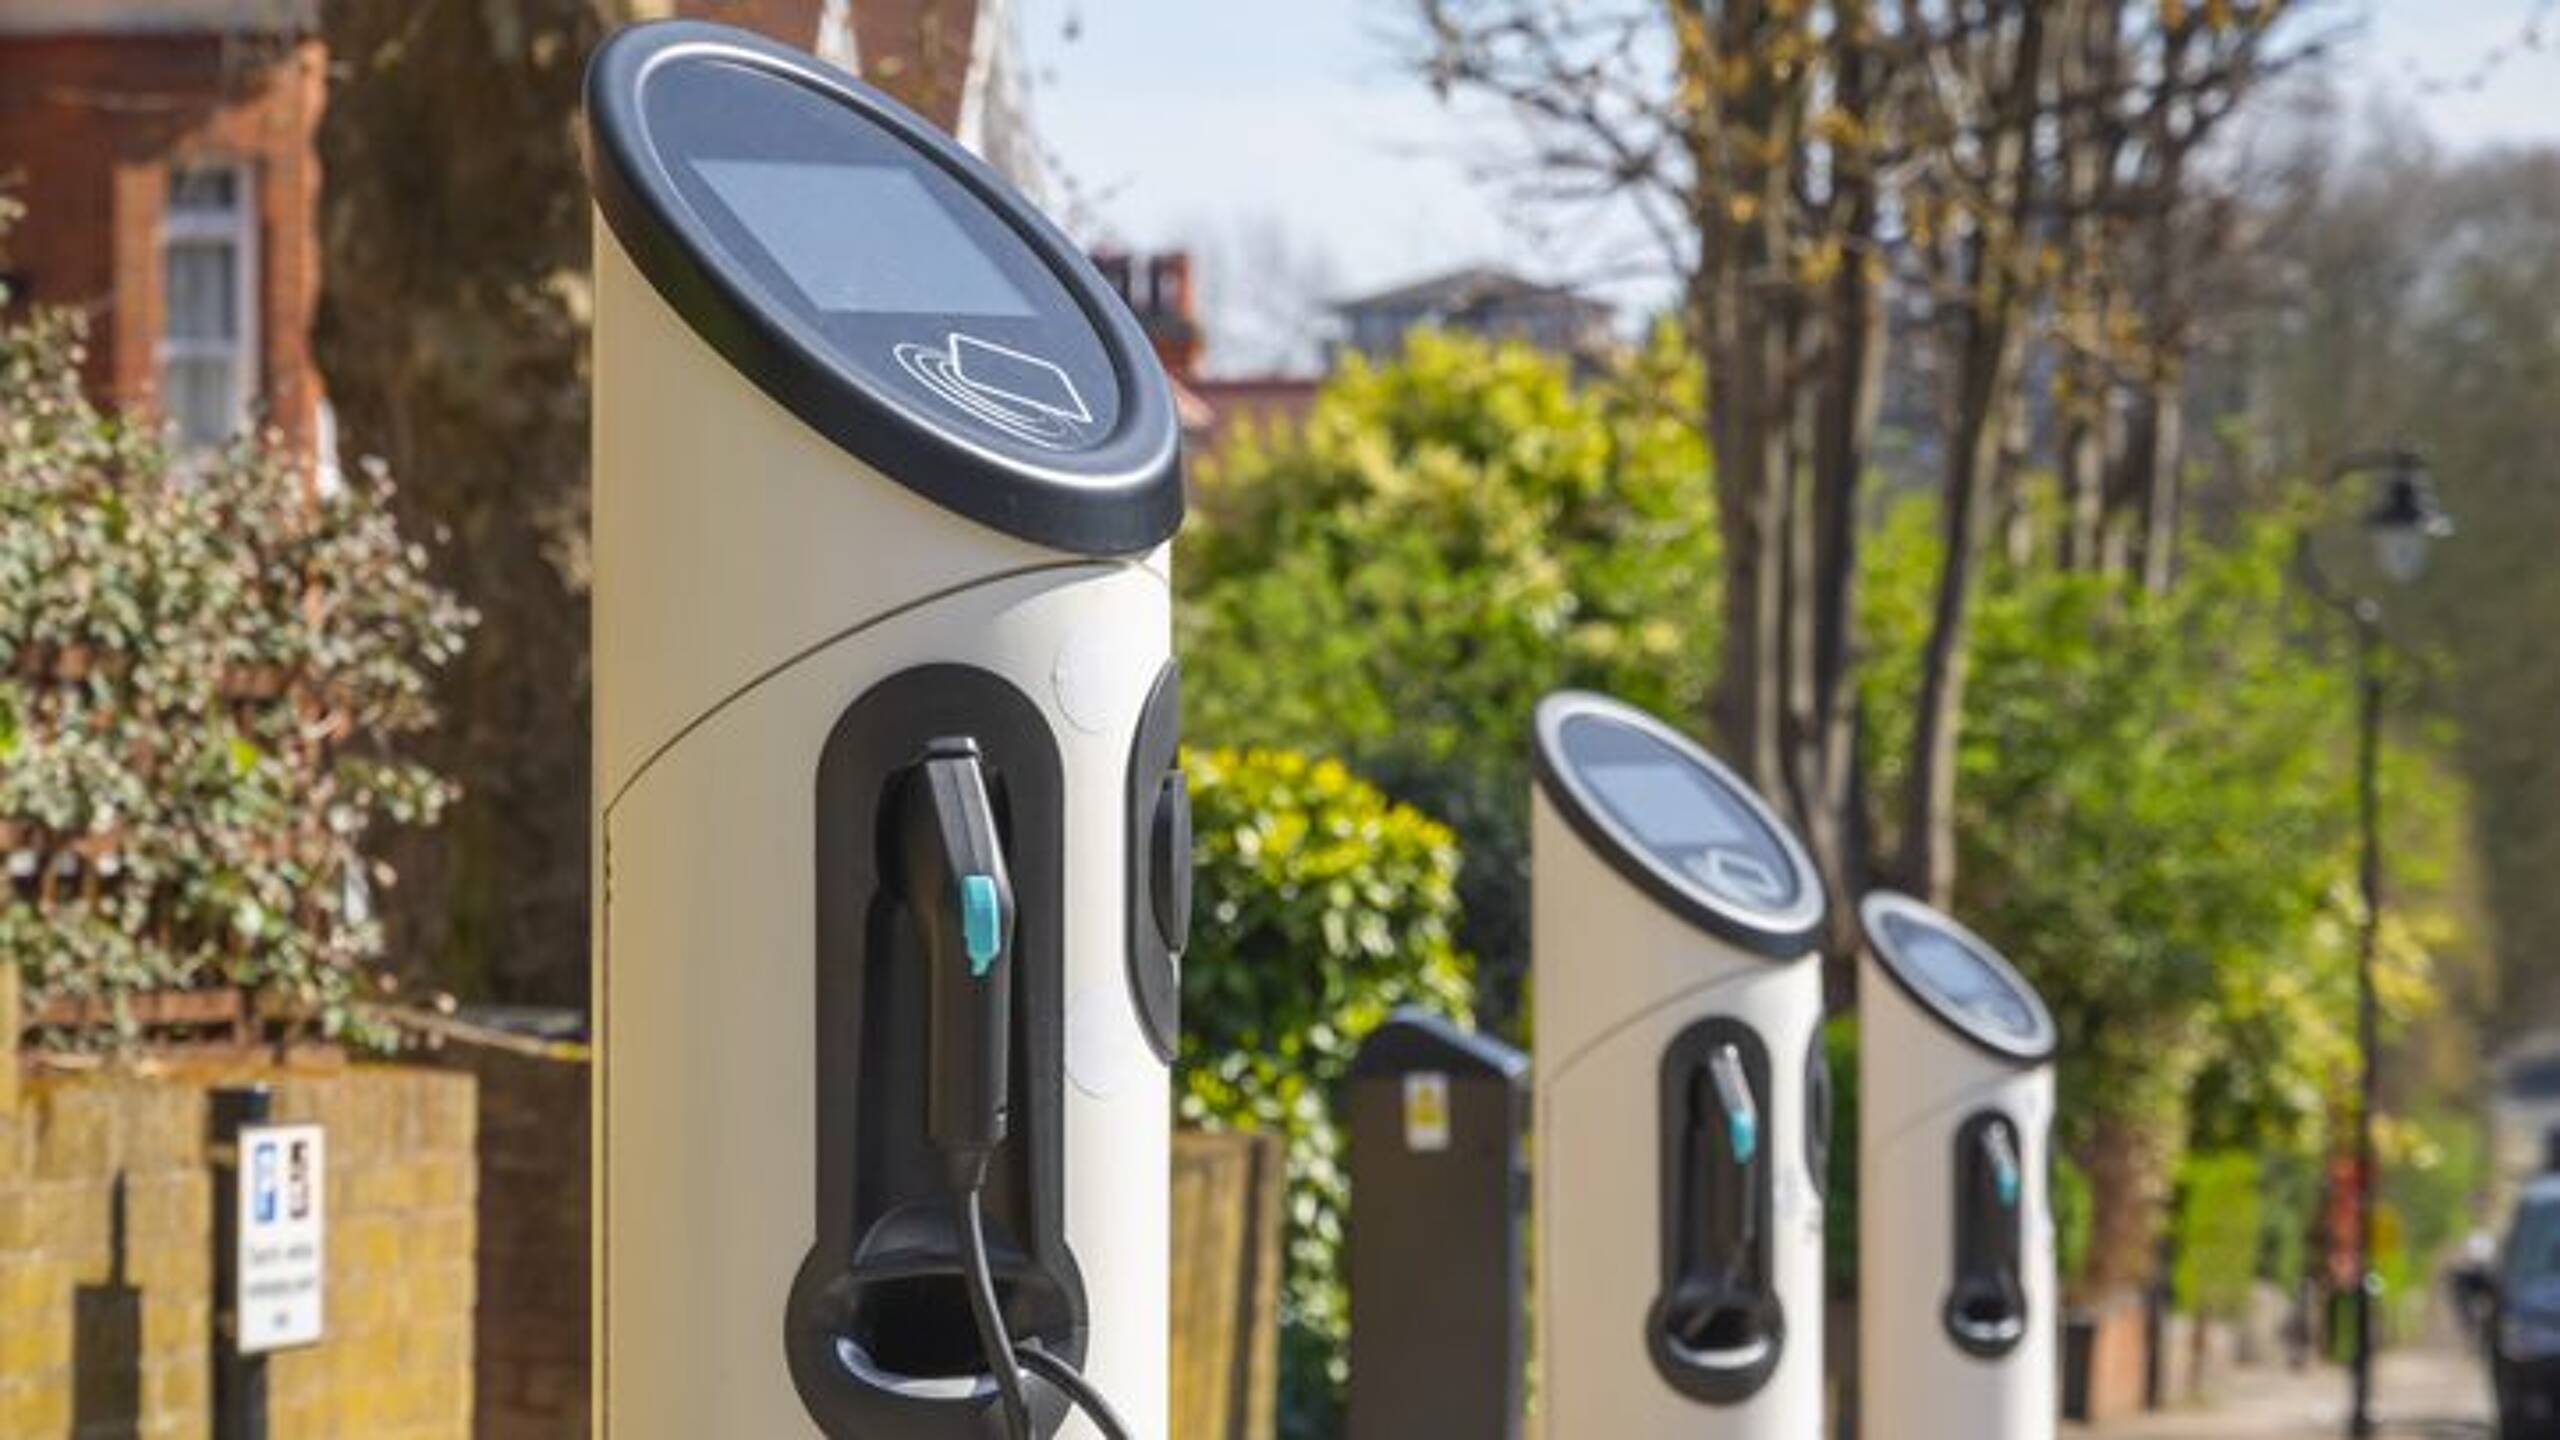 Yorkshire Water to install up to 1,000 EV chargers across sites and employee homes